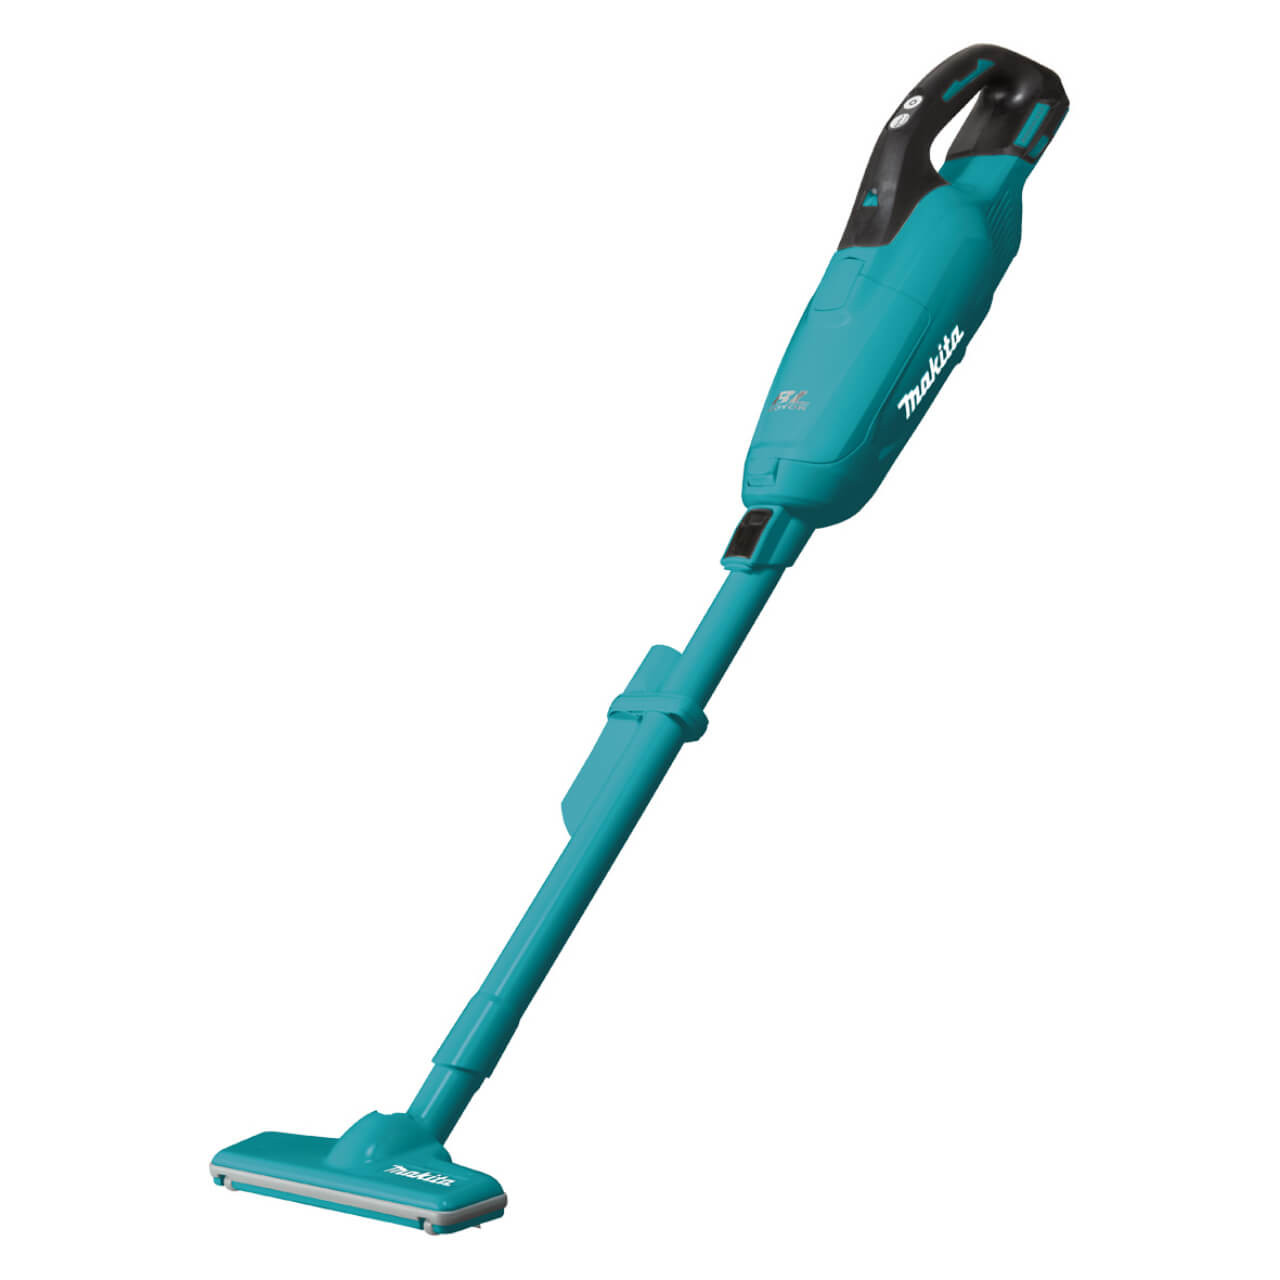 Makita 18V BRUSHLESS Stick Vacuum. Push Button Switch. Disposable Dust Bag. Teal Housing - Tool Only